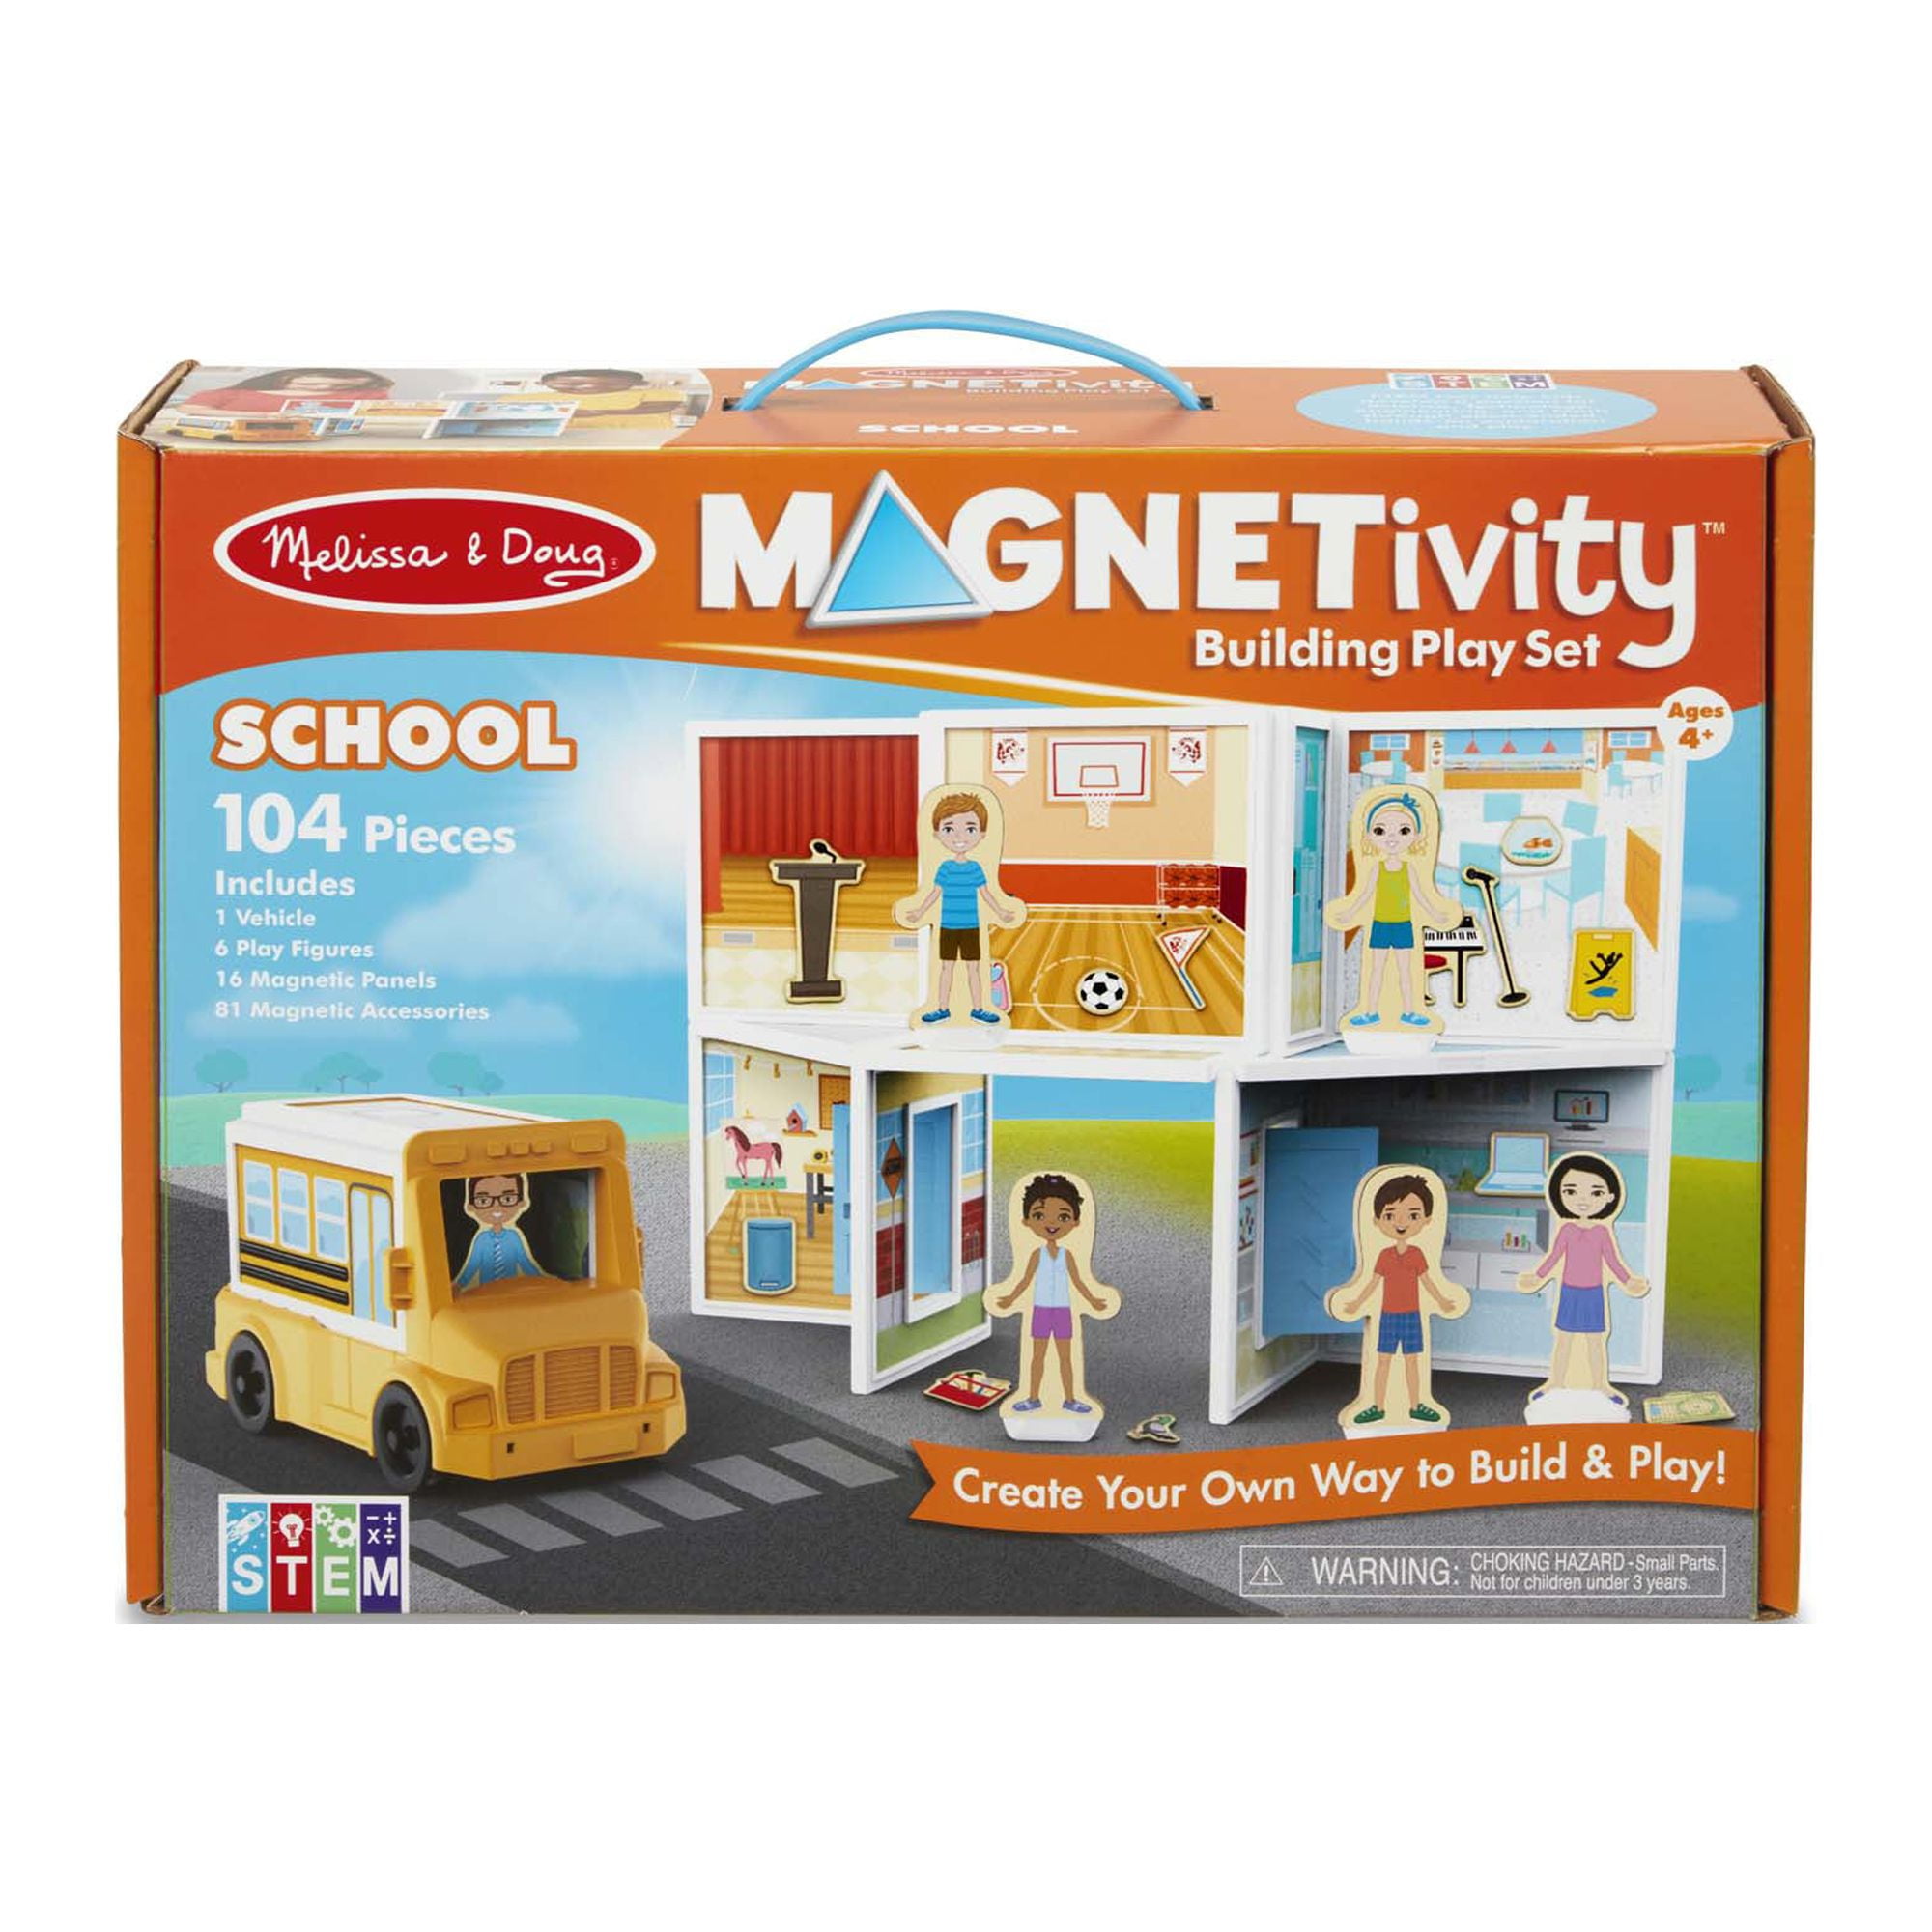 Magnetivity Magnetic Building Play Set - Pizza & Ice Cream Shop